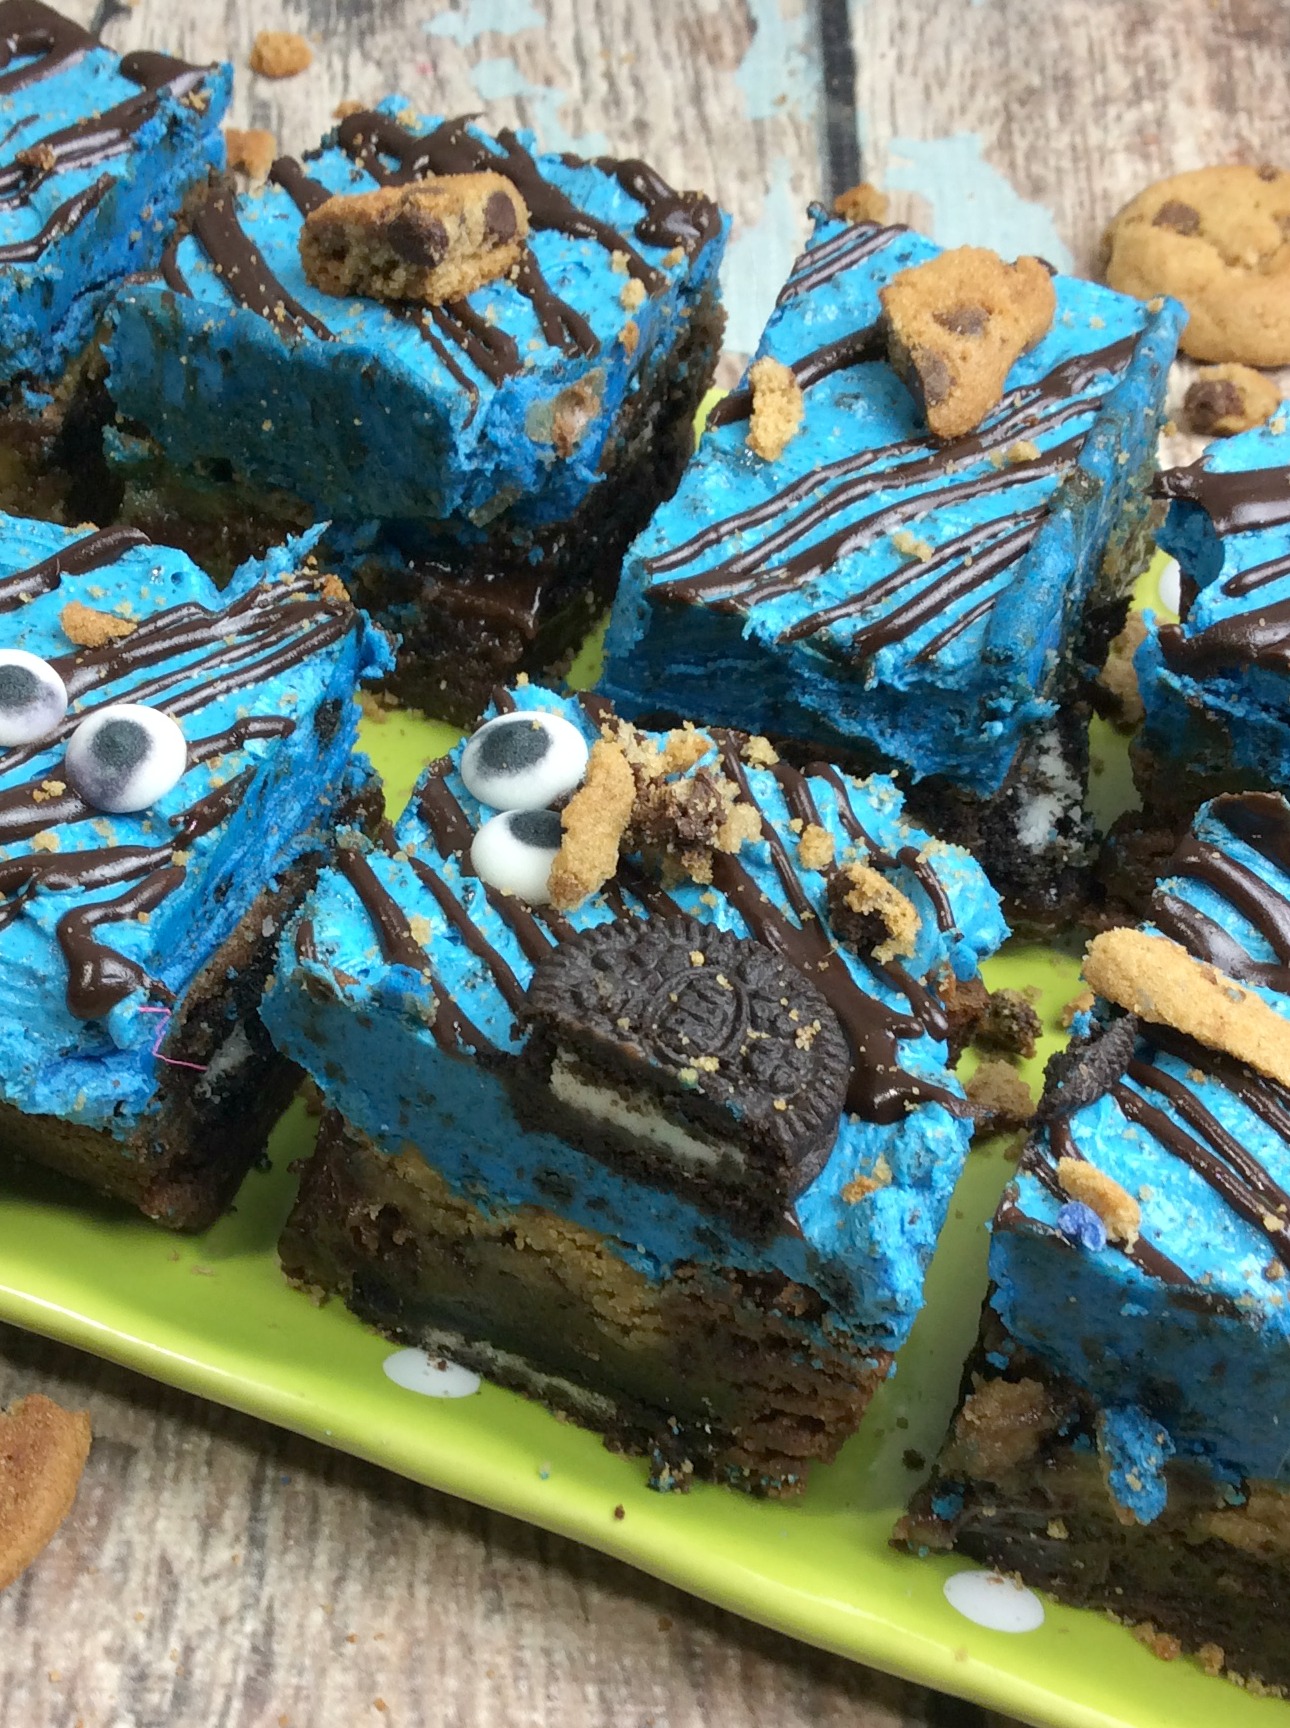 Looking for a fun cookie monster treat? These Cookie Monster Brownies are so tasty and kids will love them. Perfect for your Cookie Monster fan.